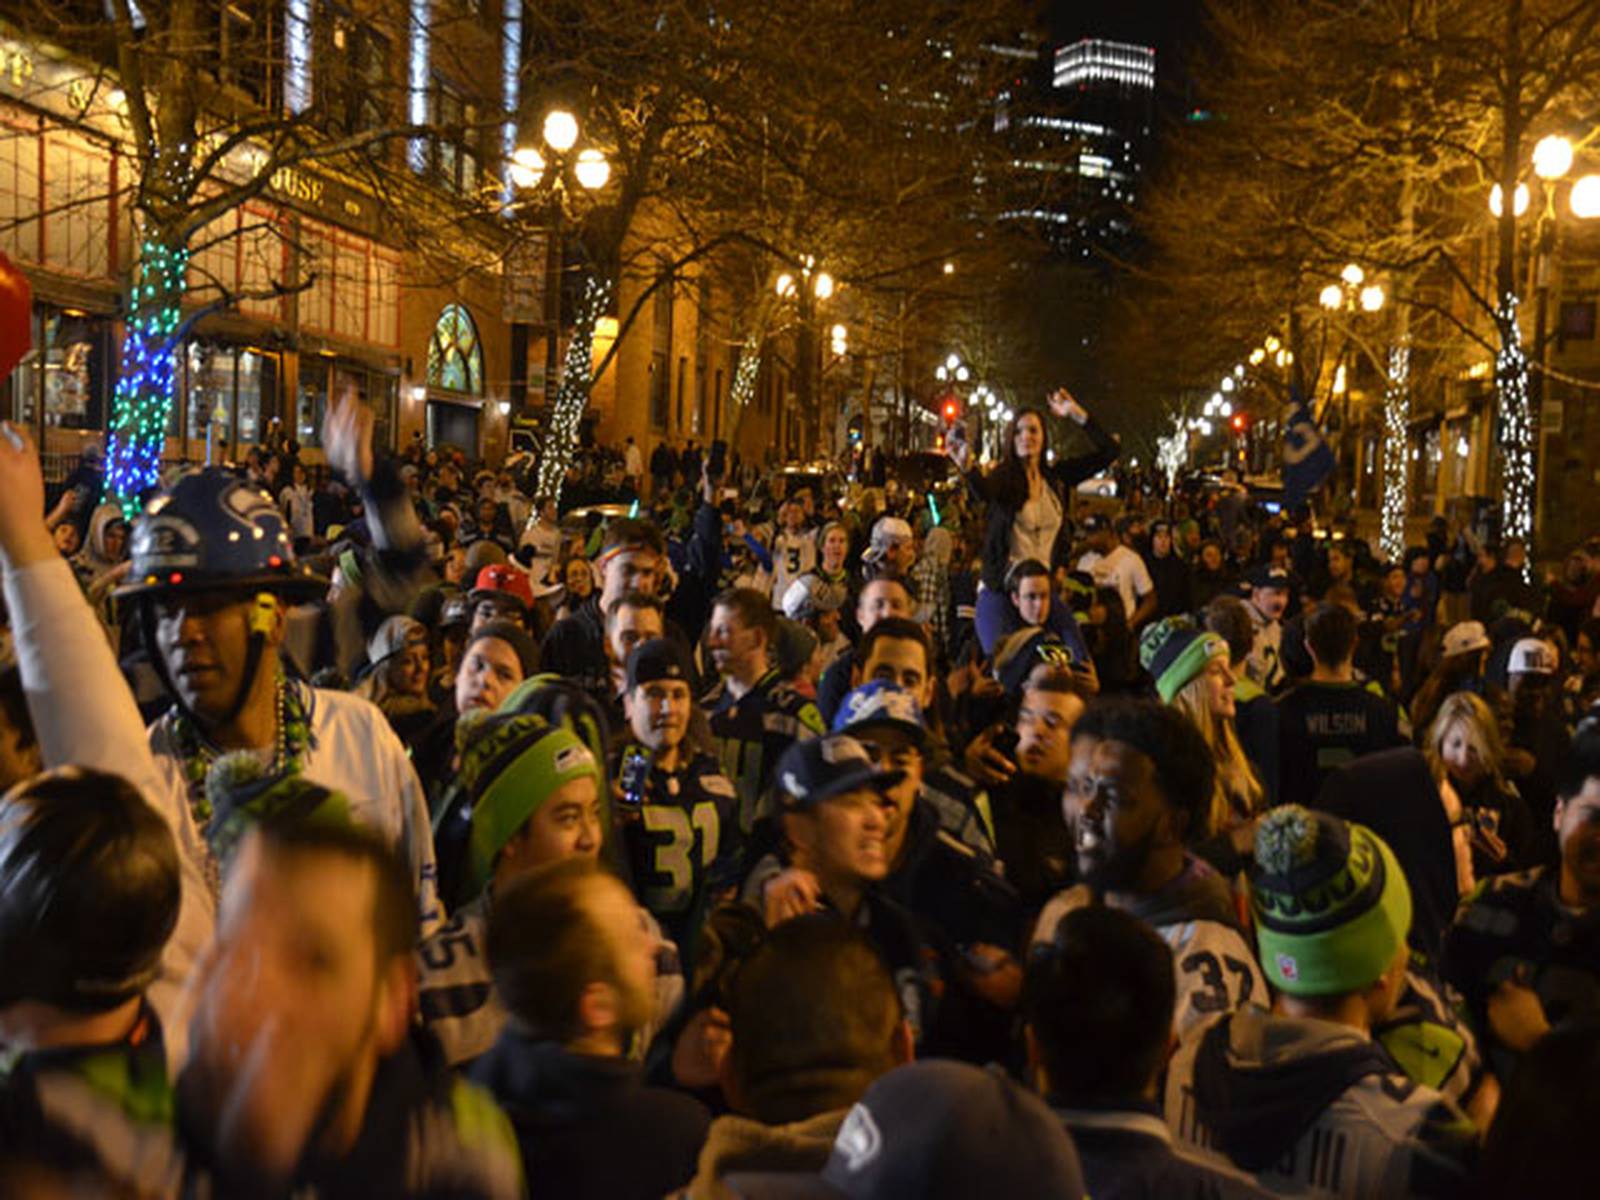 Details emerge about parade for Seahawks – KIRO 7 News Seattle